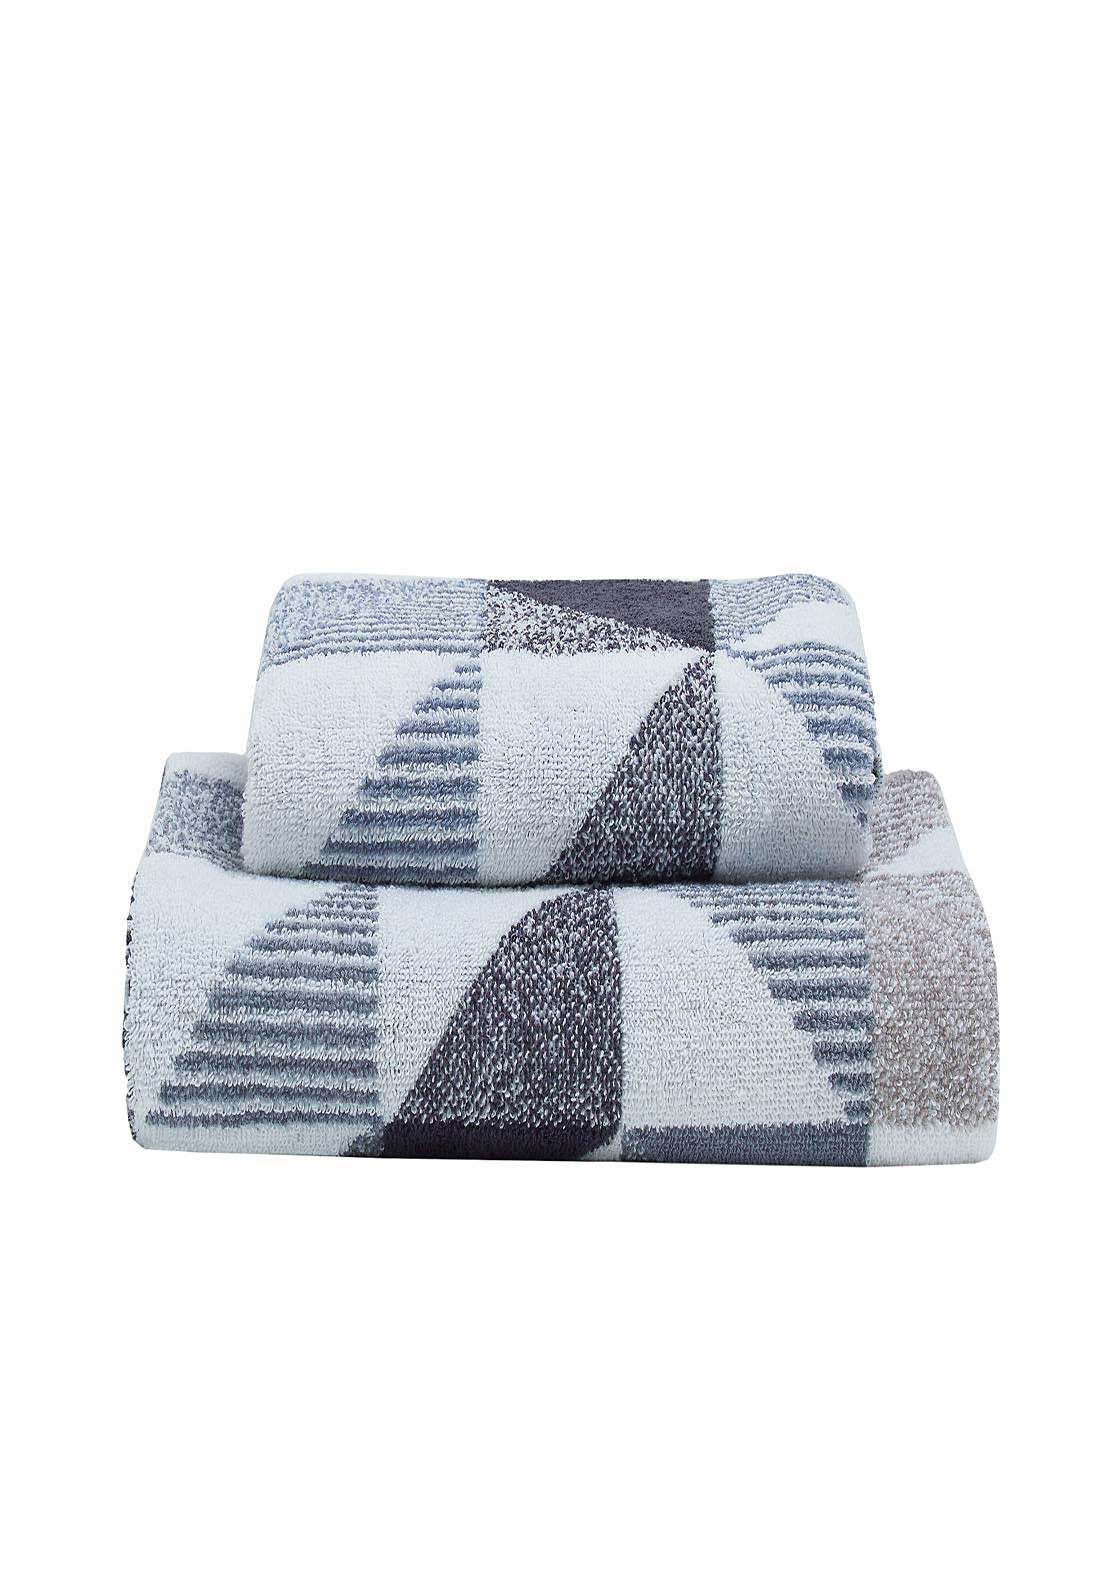 The Home Collection Hendra Bath Towel - Monochrome 2 Shaws Department Stores